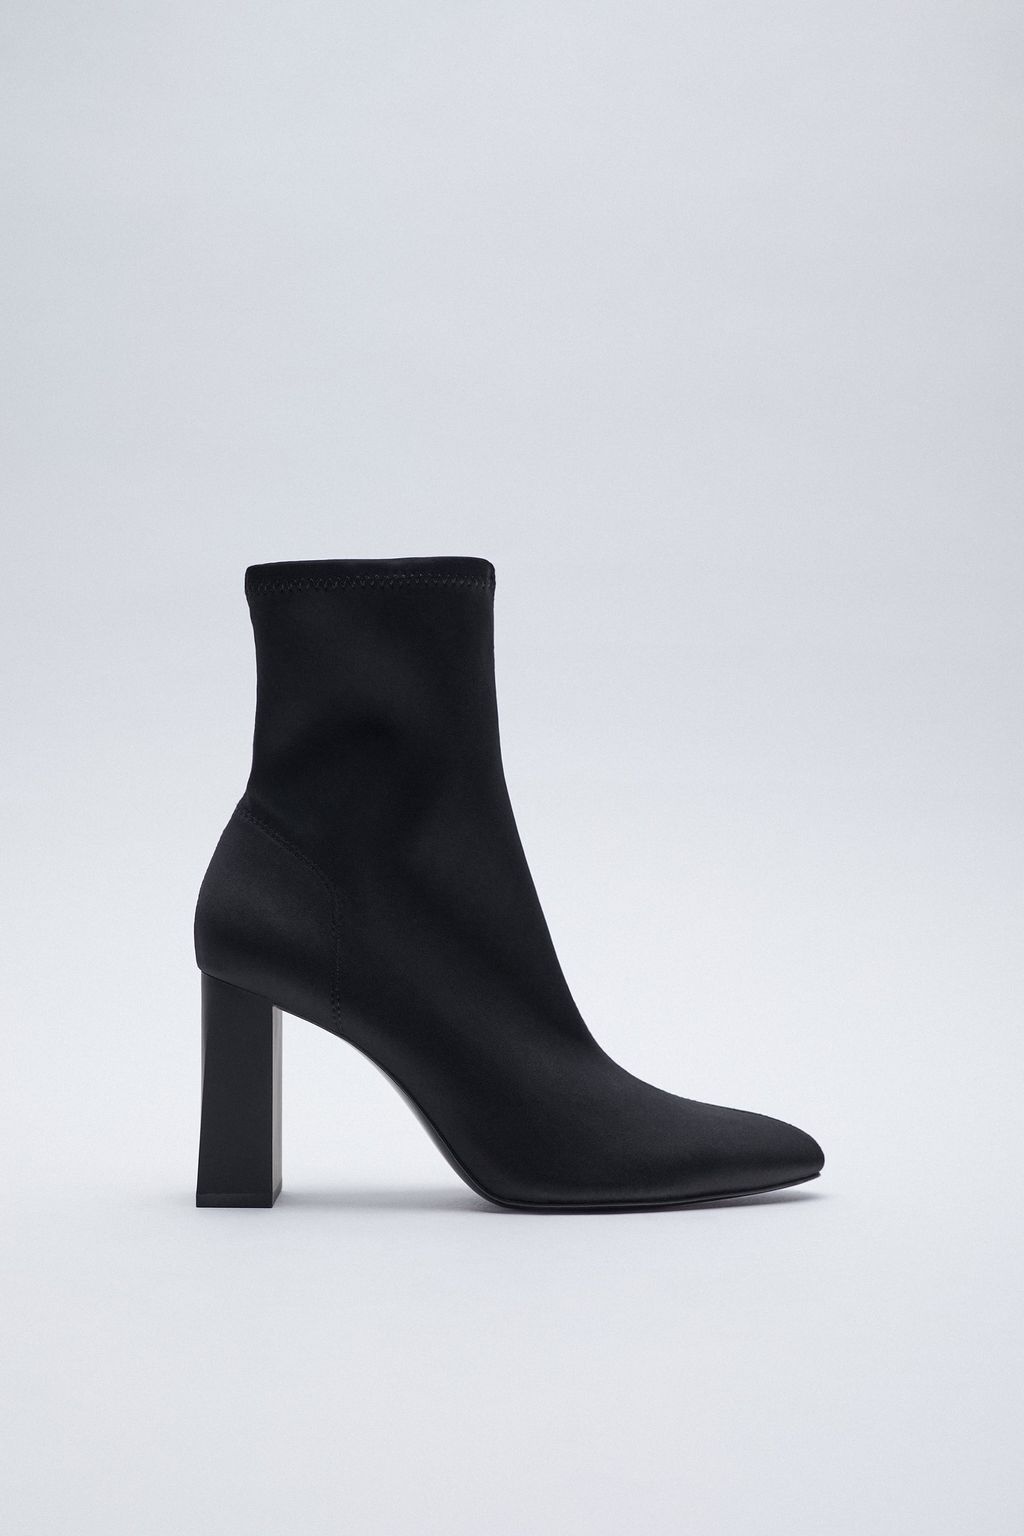 These Are the 25 Best New Shoes From Zara | Who What Wear